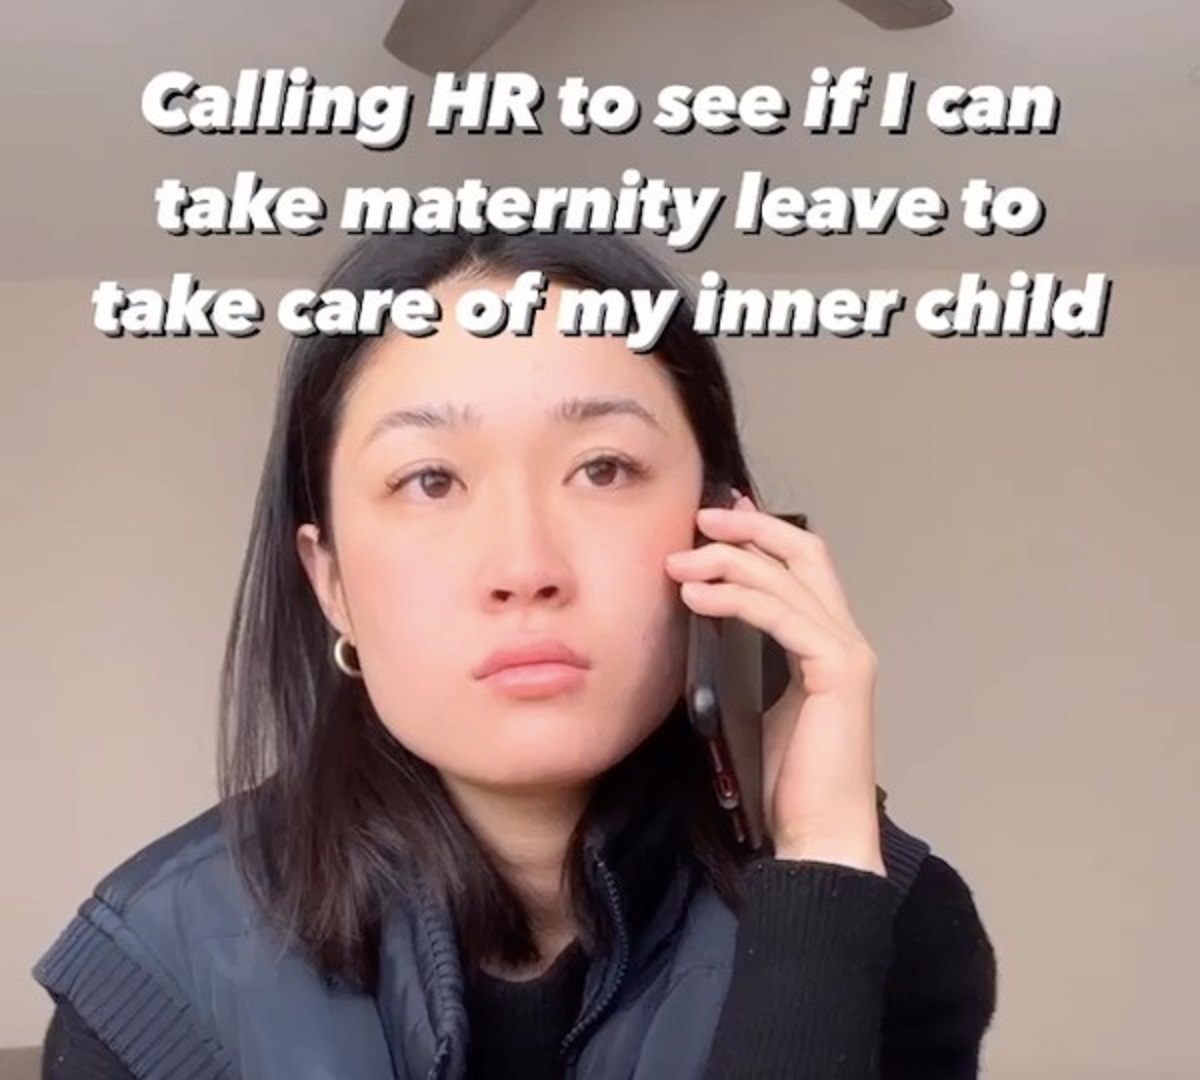 girl - Calling Hr to see if I can take maternity leave to take care of my inner child